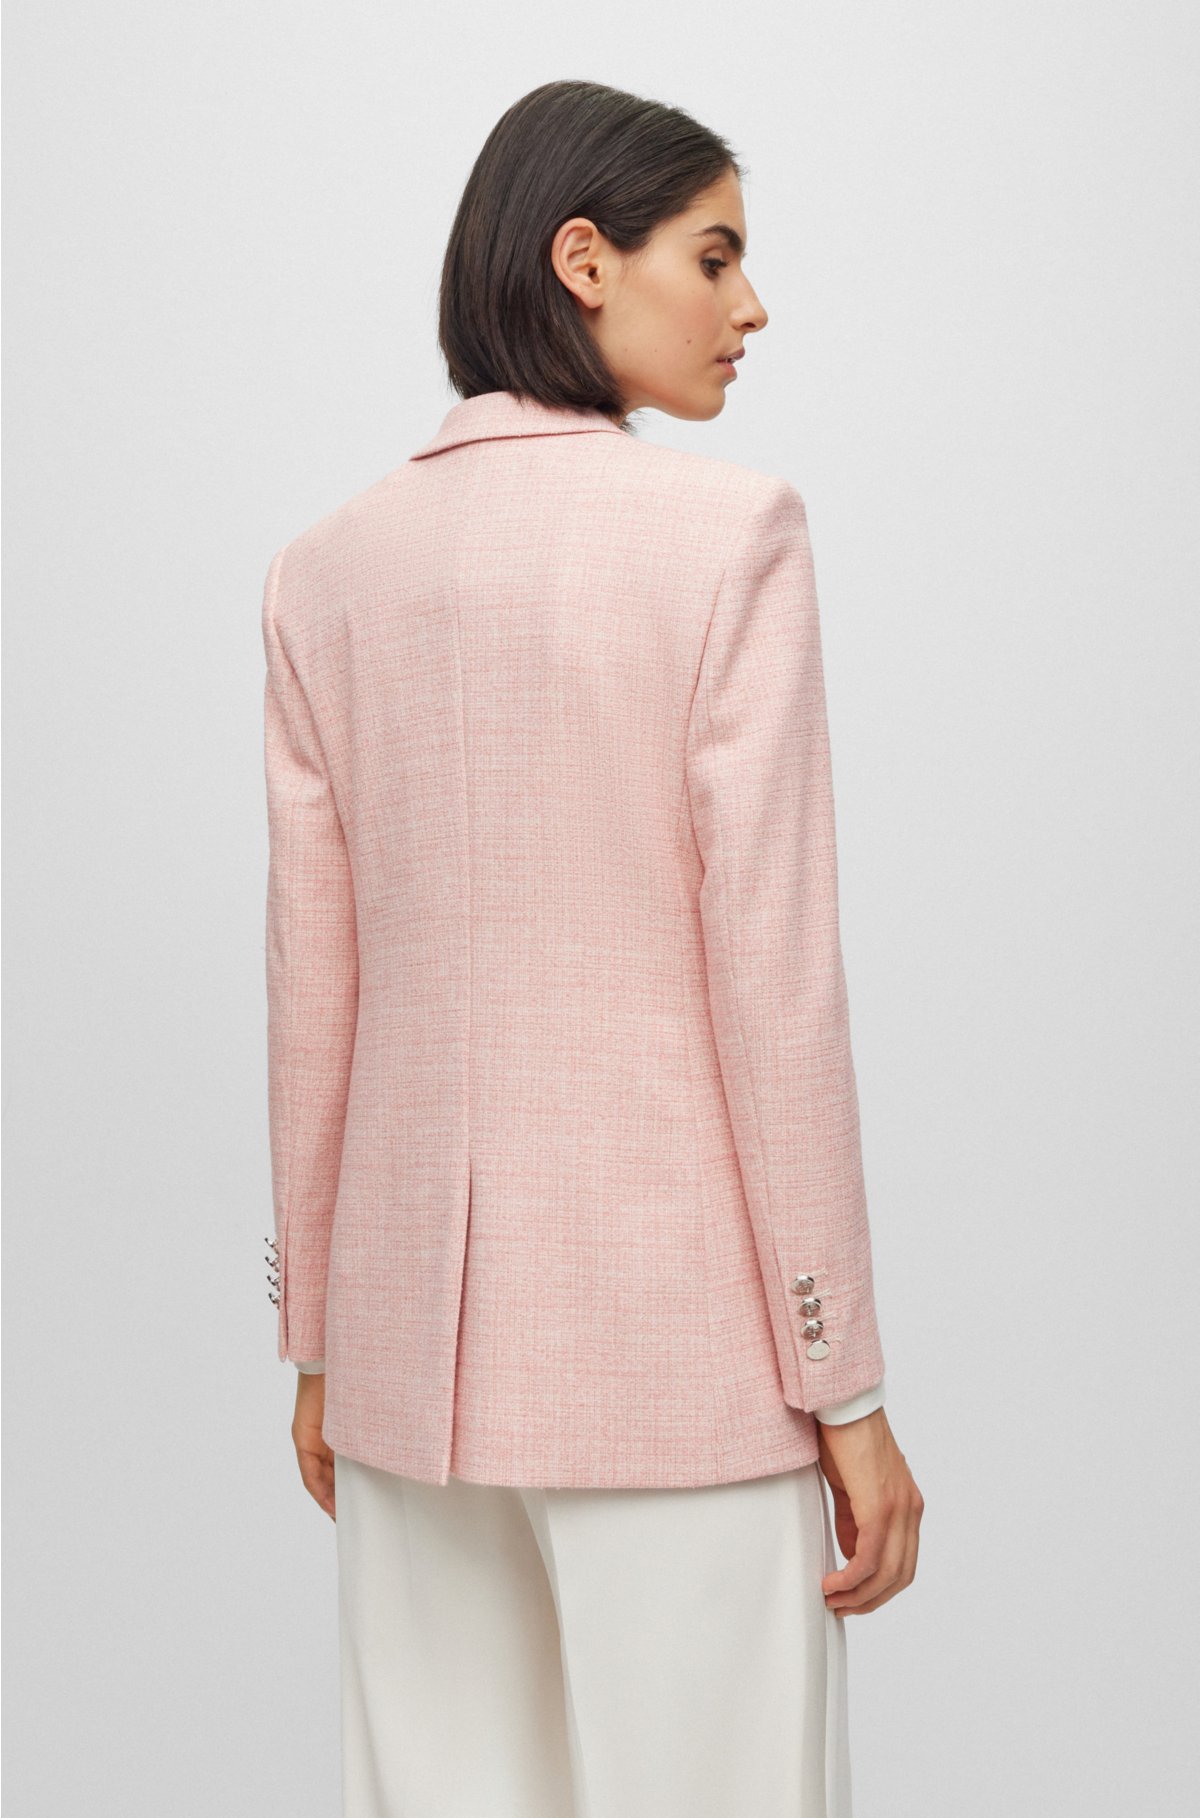 BOSS - BOSS x Alica Schmidt regular-fit jacket with double-breasted front